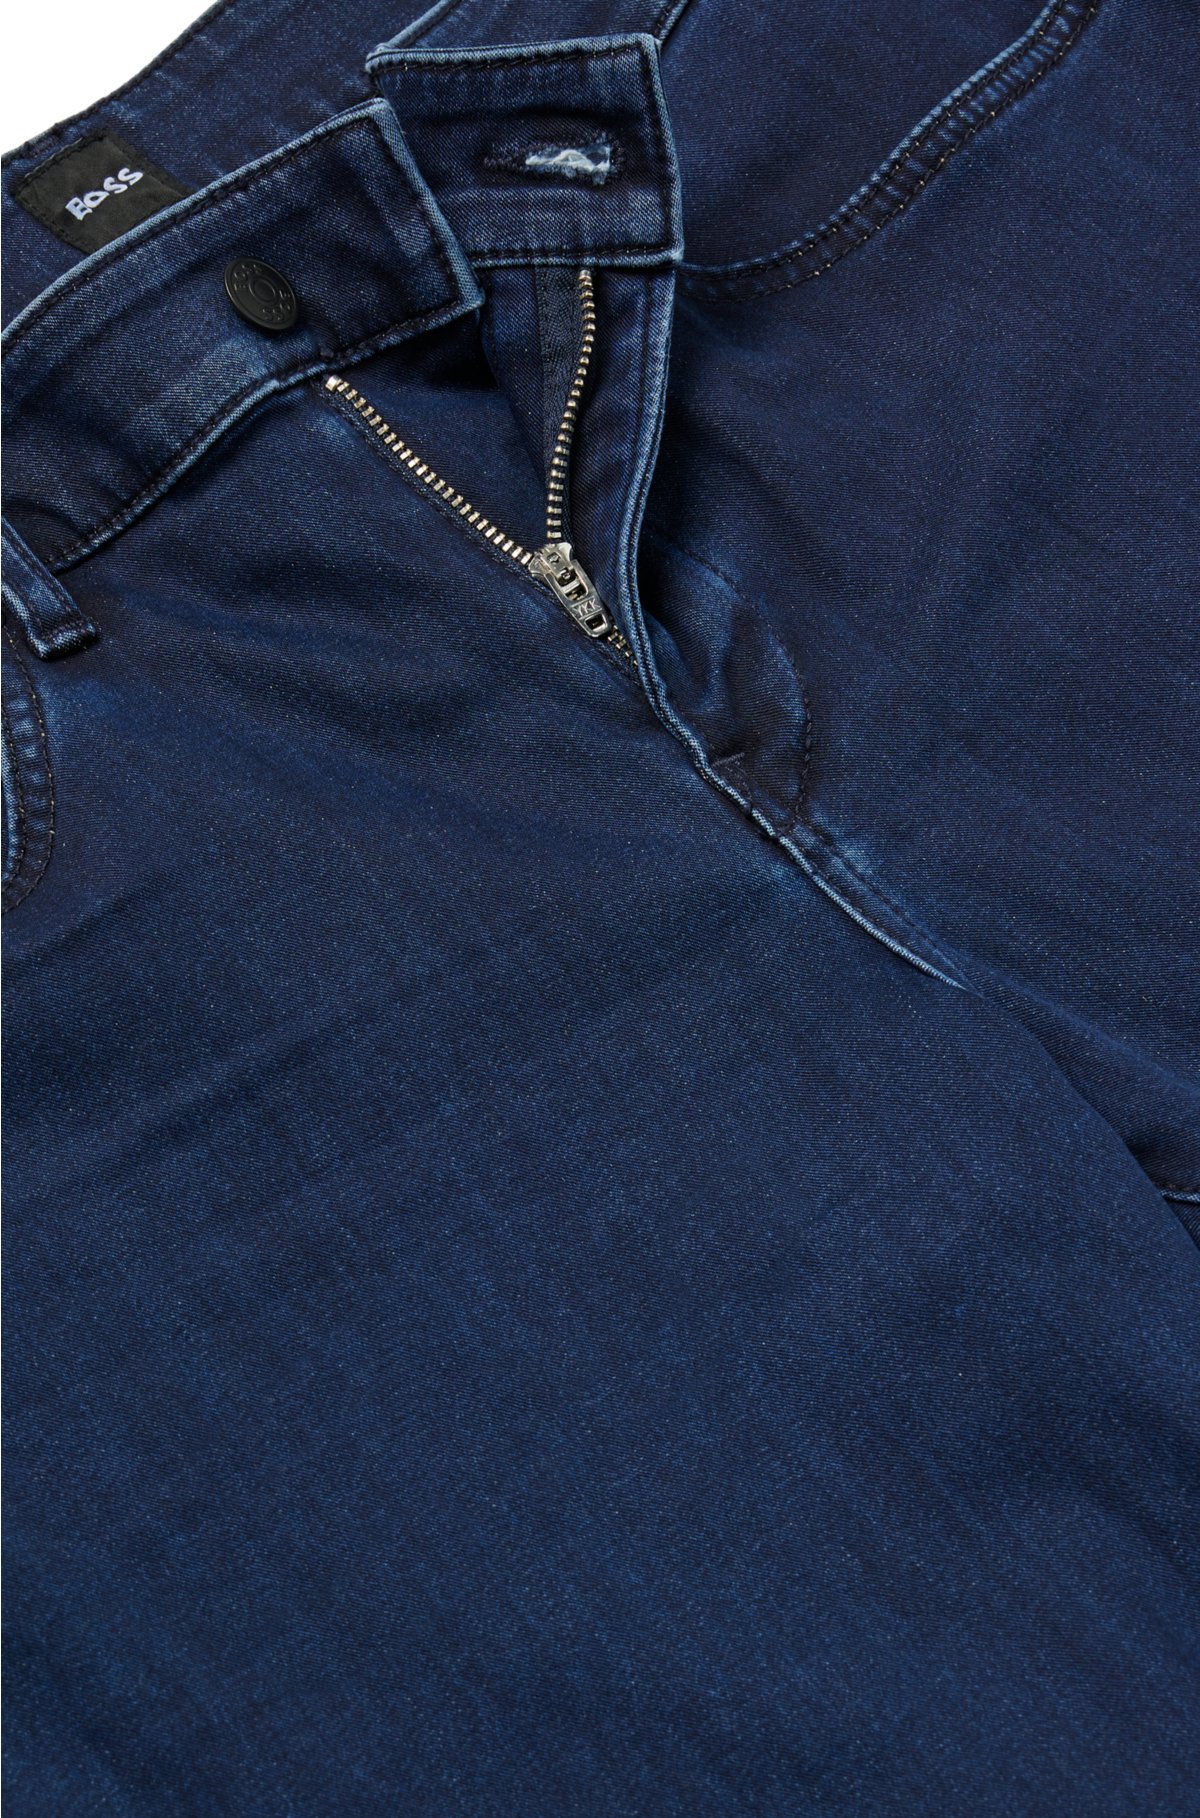 BOSS - Slim-fit jeans satin-touch in denim blue